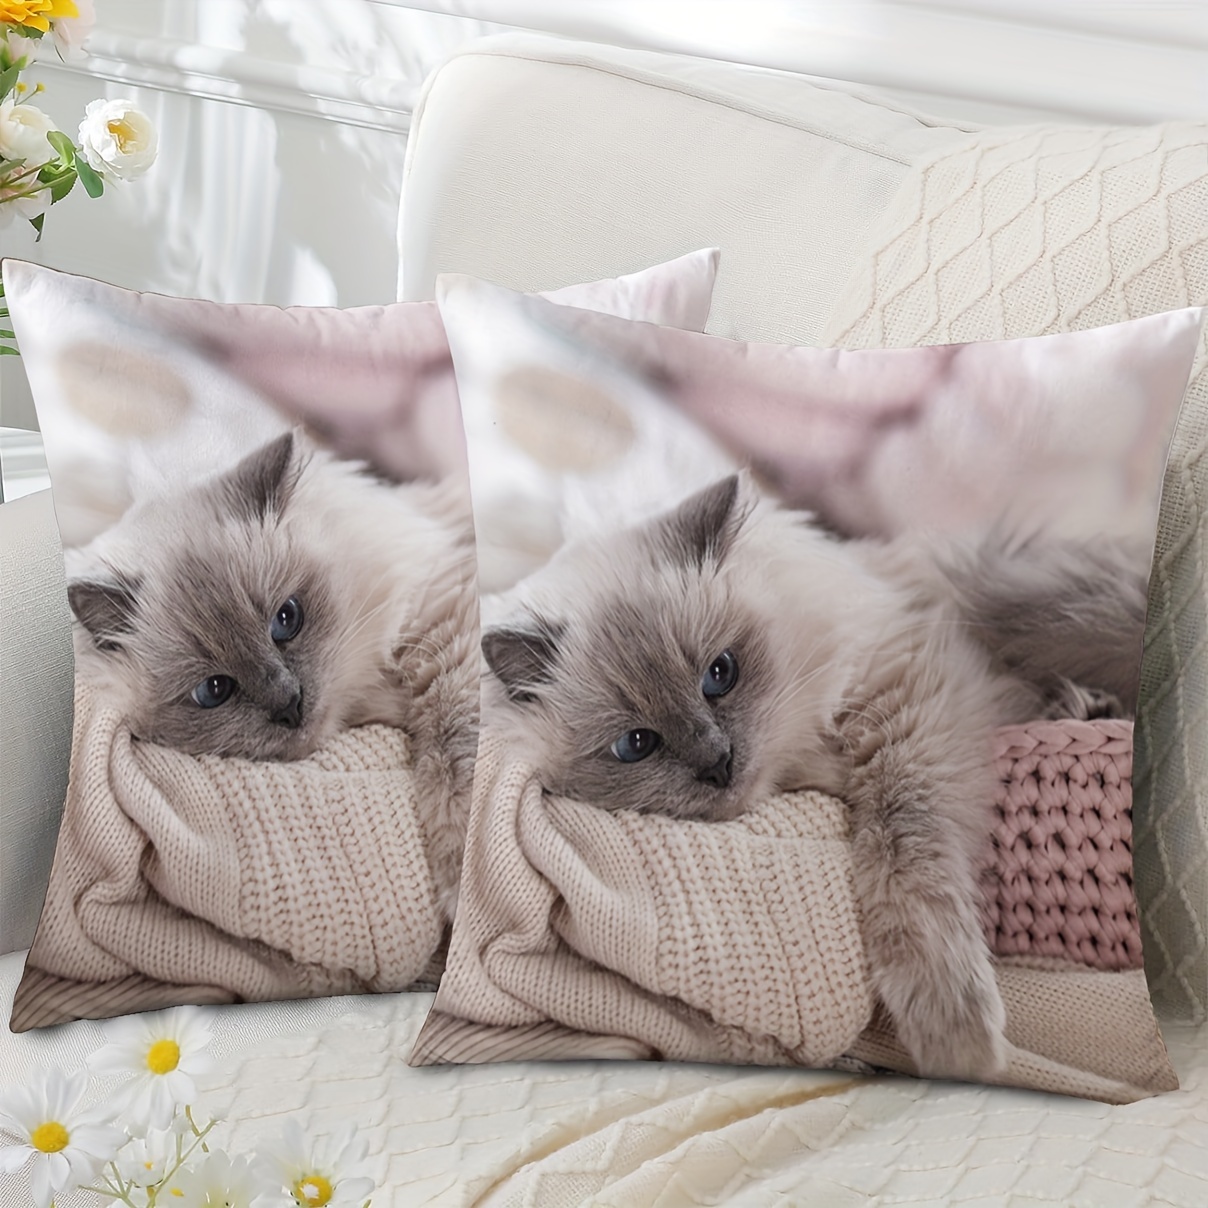 

2pcs, Blue Eyed Cat Pillow Cover Art Animal Retro Minimalist Dormitory Living Room Home Decoration Short Plush Fabric Double-sided Printing Without Pillow Core